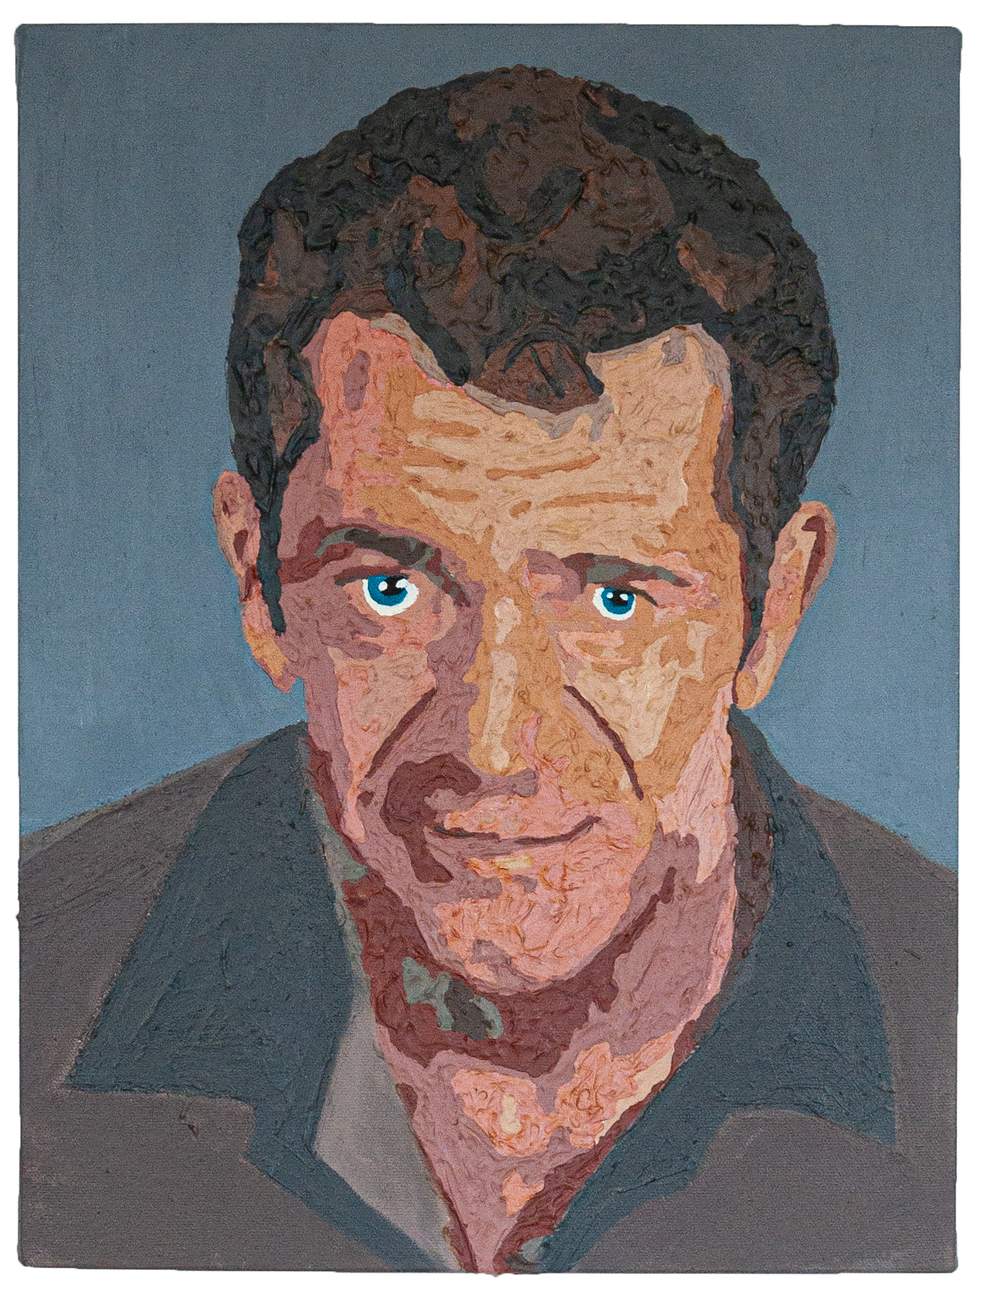 Preview image for Mugshot 9 (Mel Gibson)